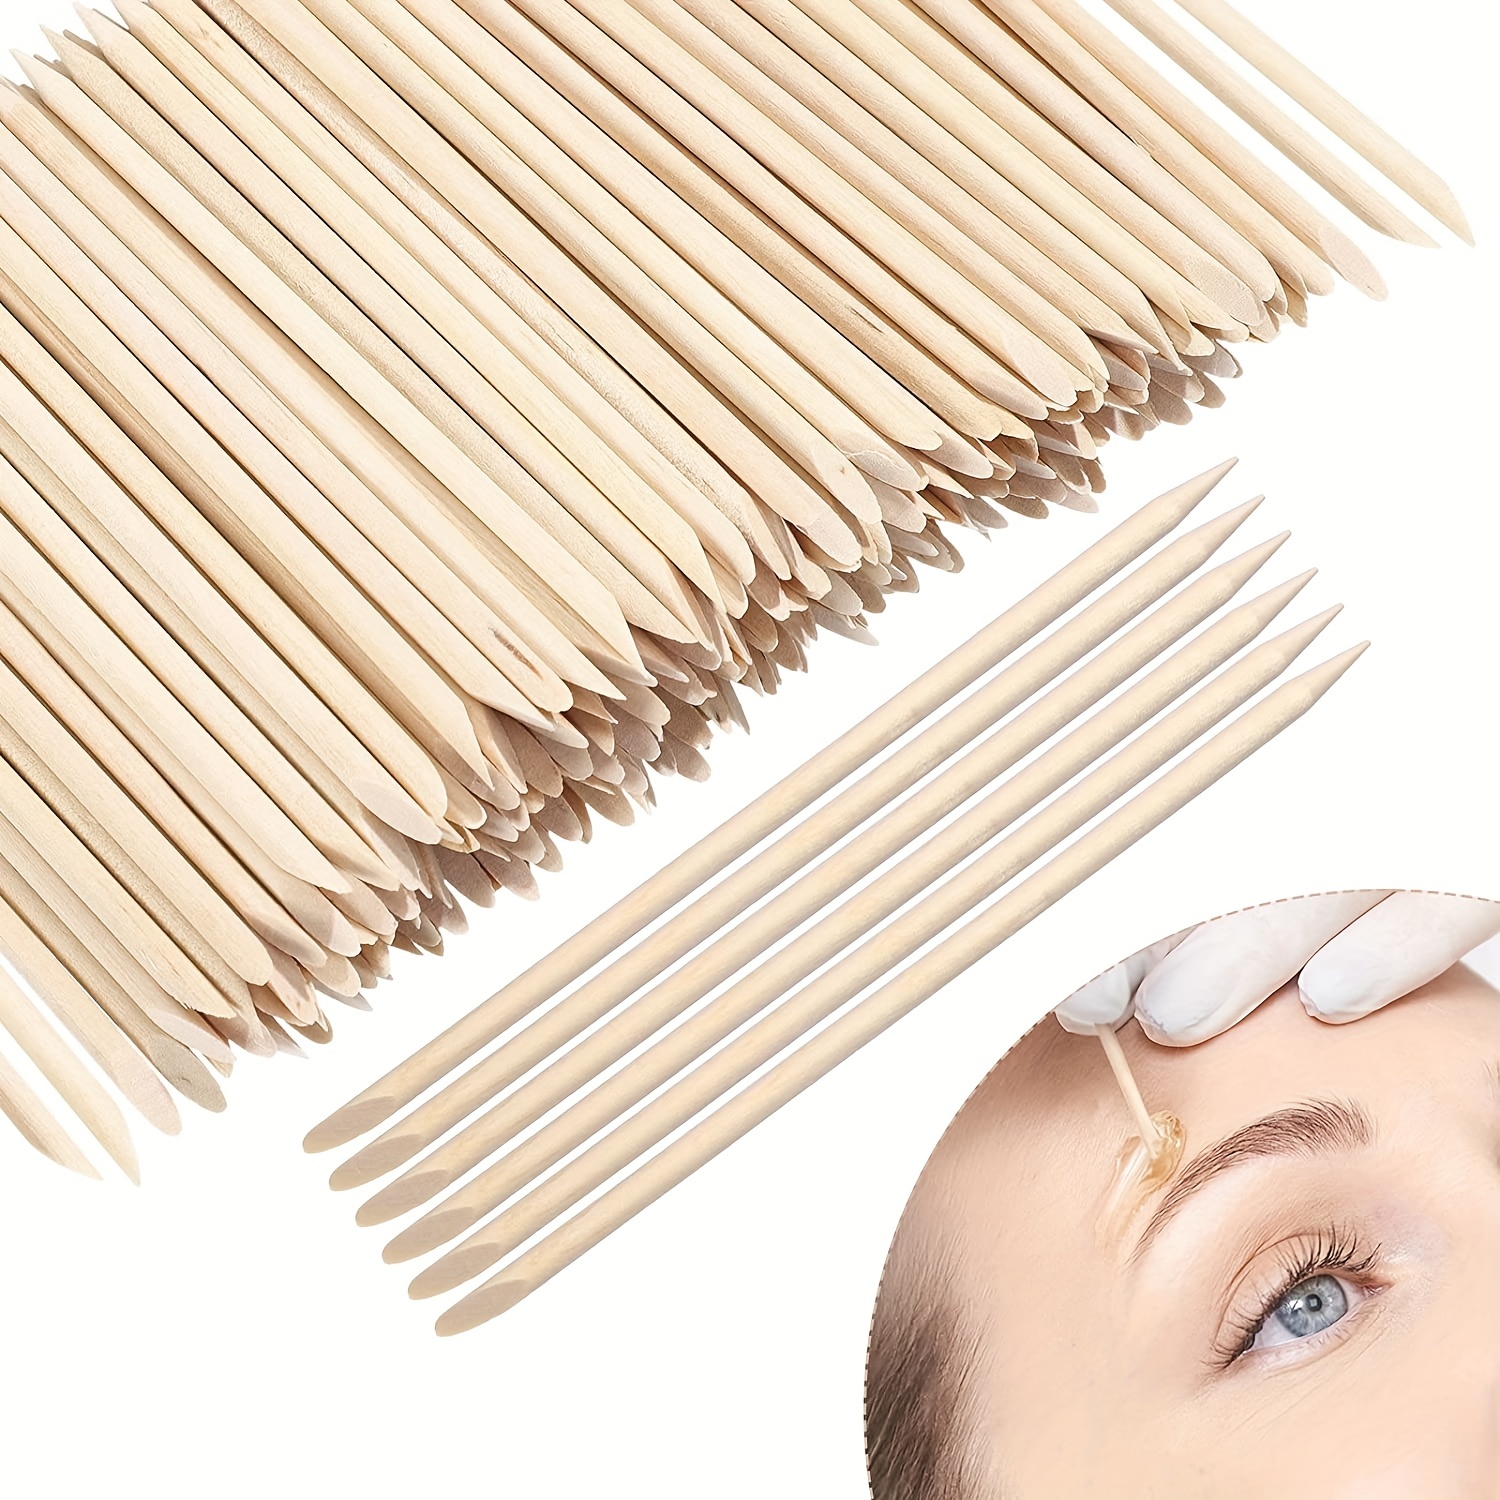 400 Pcs Wax Strips and Sticks Hair Removal Wax Strips with Wooden Wax Applicator Sticks for Body Skin Hair Removal, Other